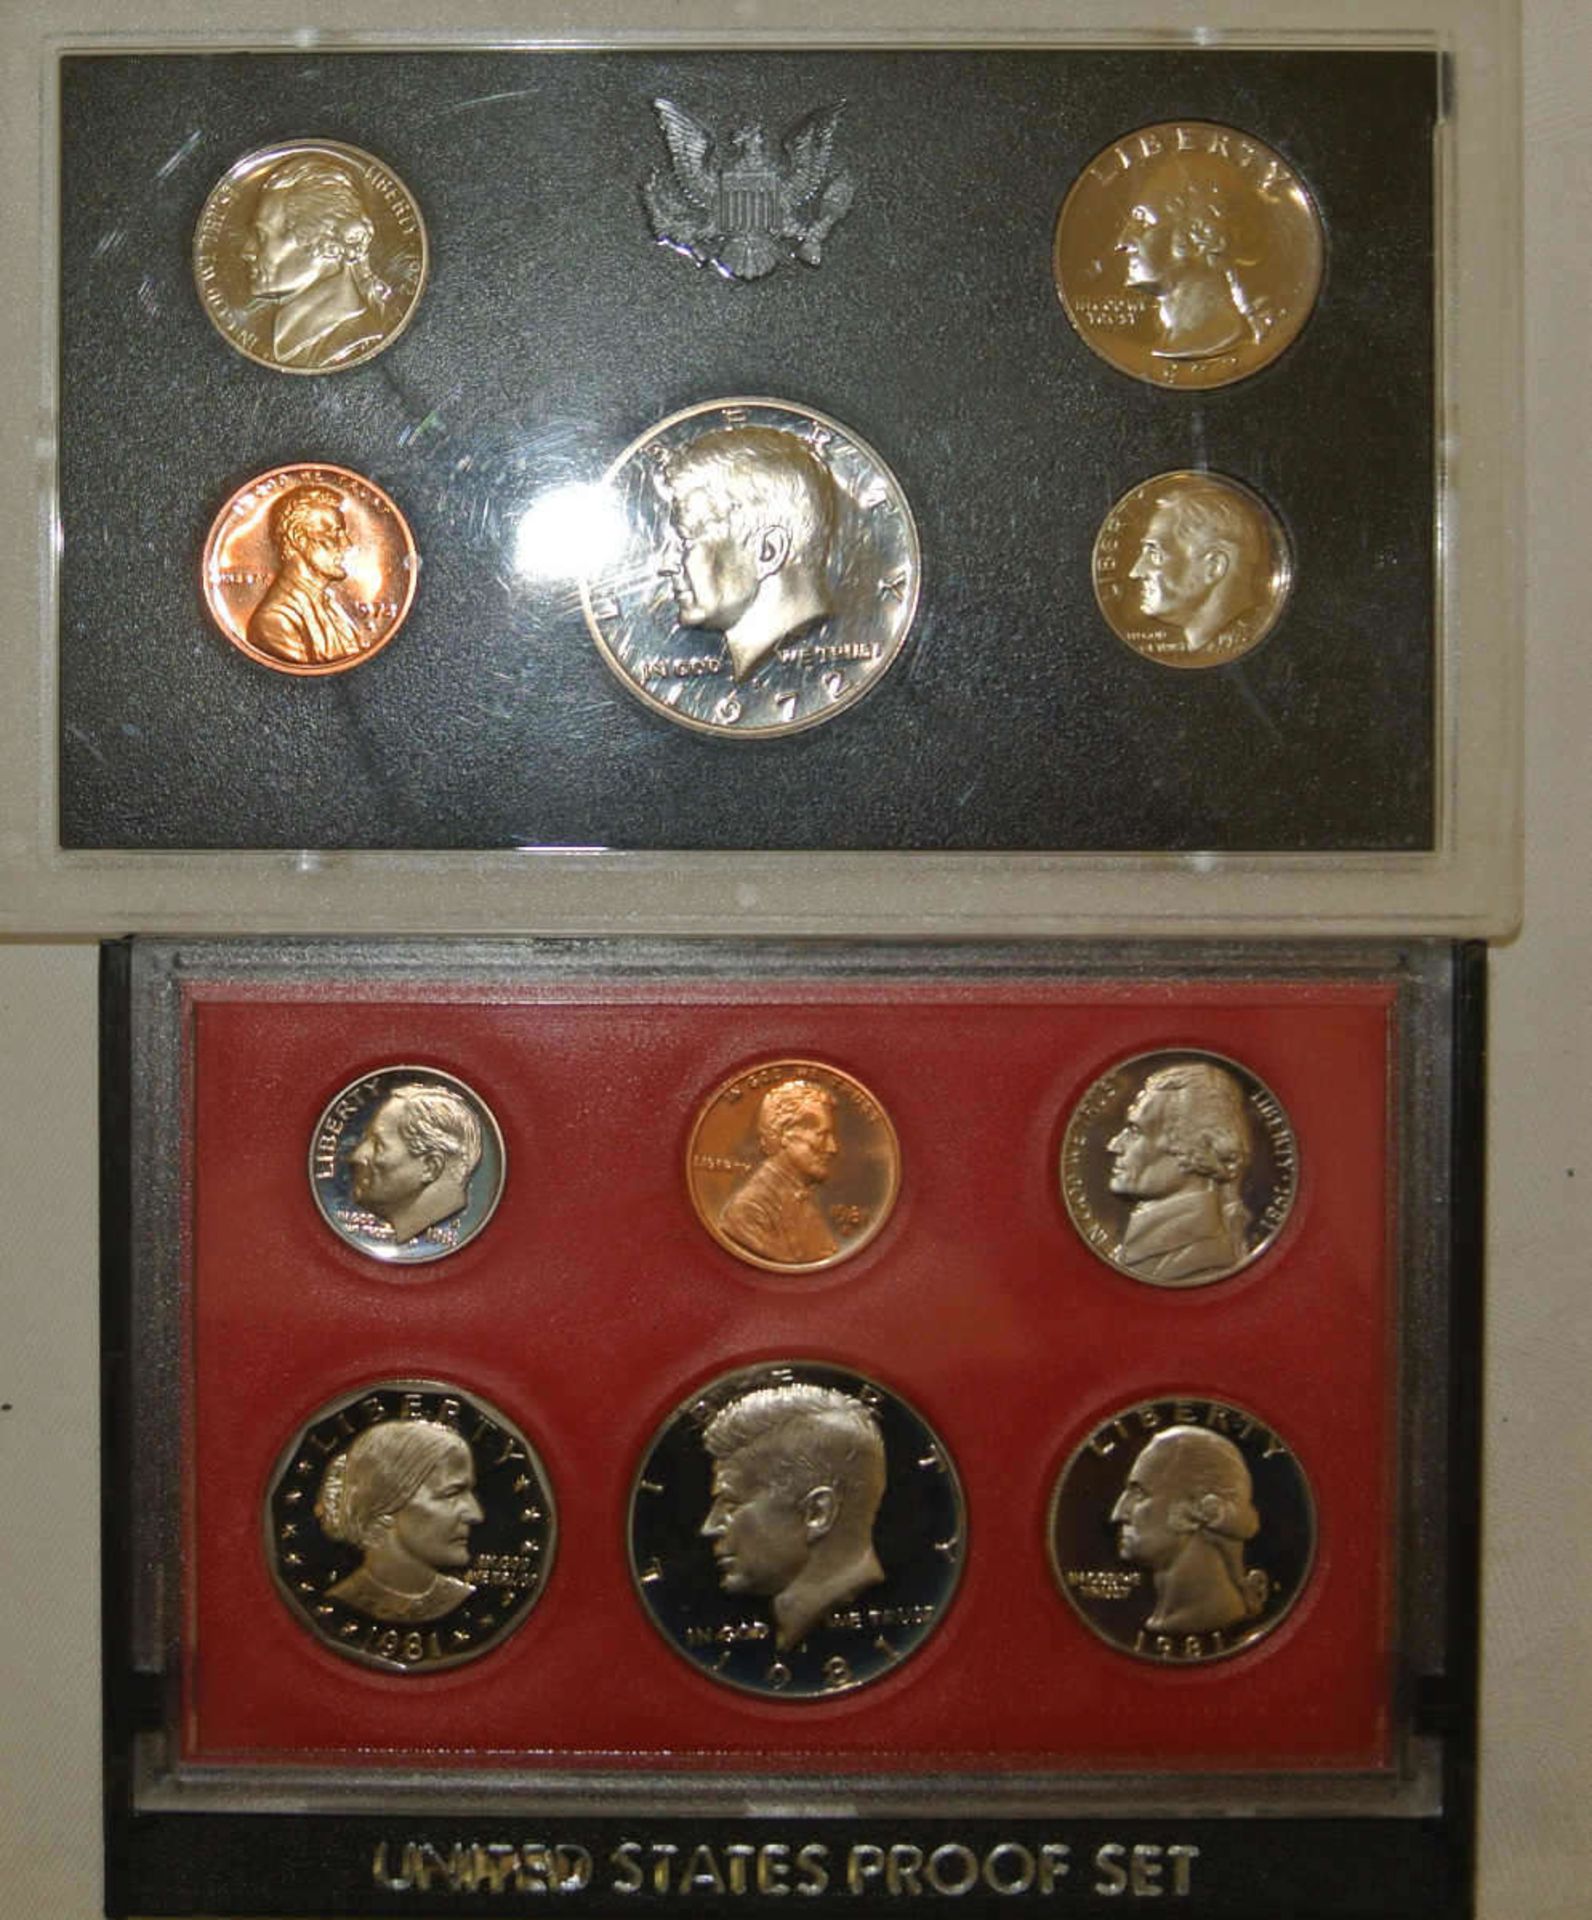 2 x USA Proof Sets, 1x 1972, sowie 1x 1981 2 x USA proof sets, 1x 1972, as well as 1x 1981